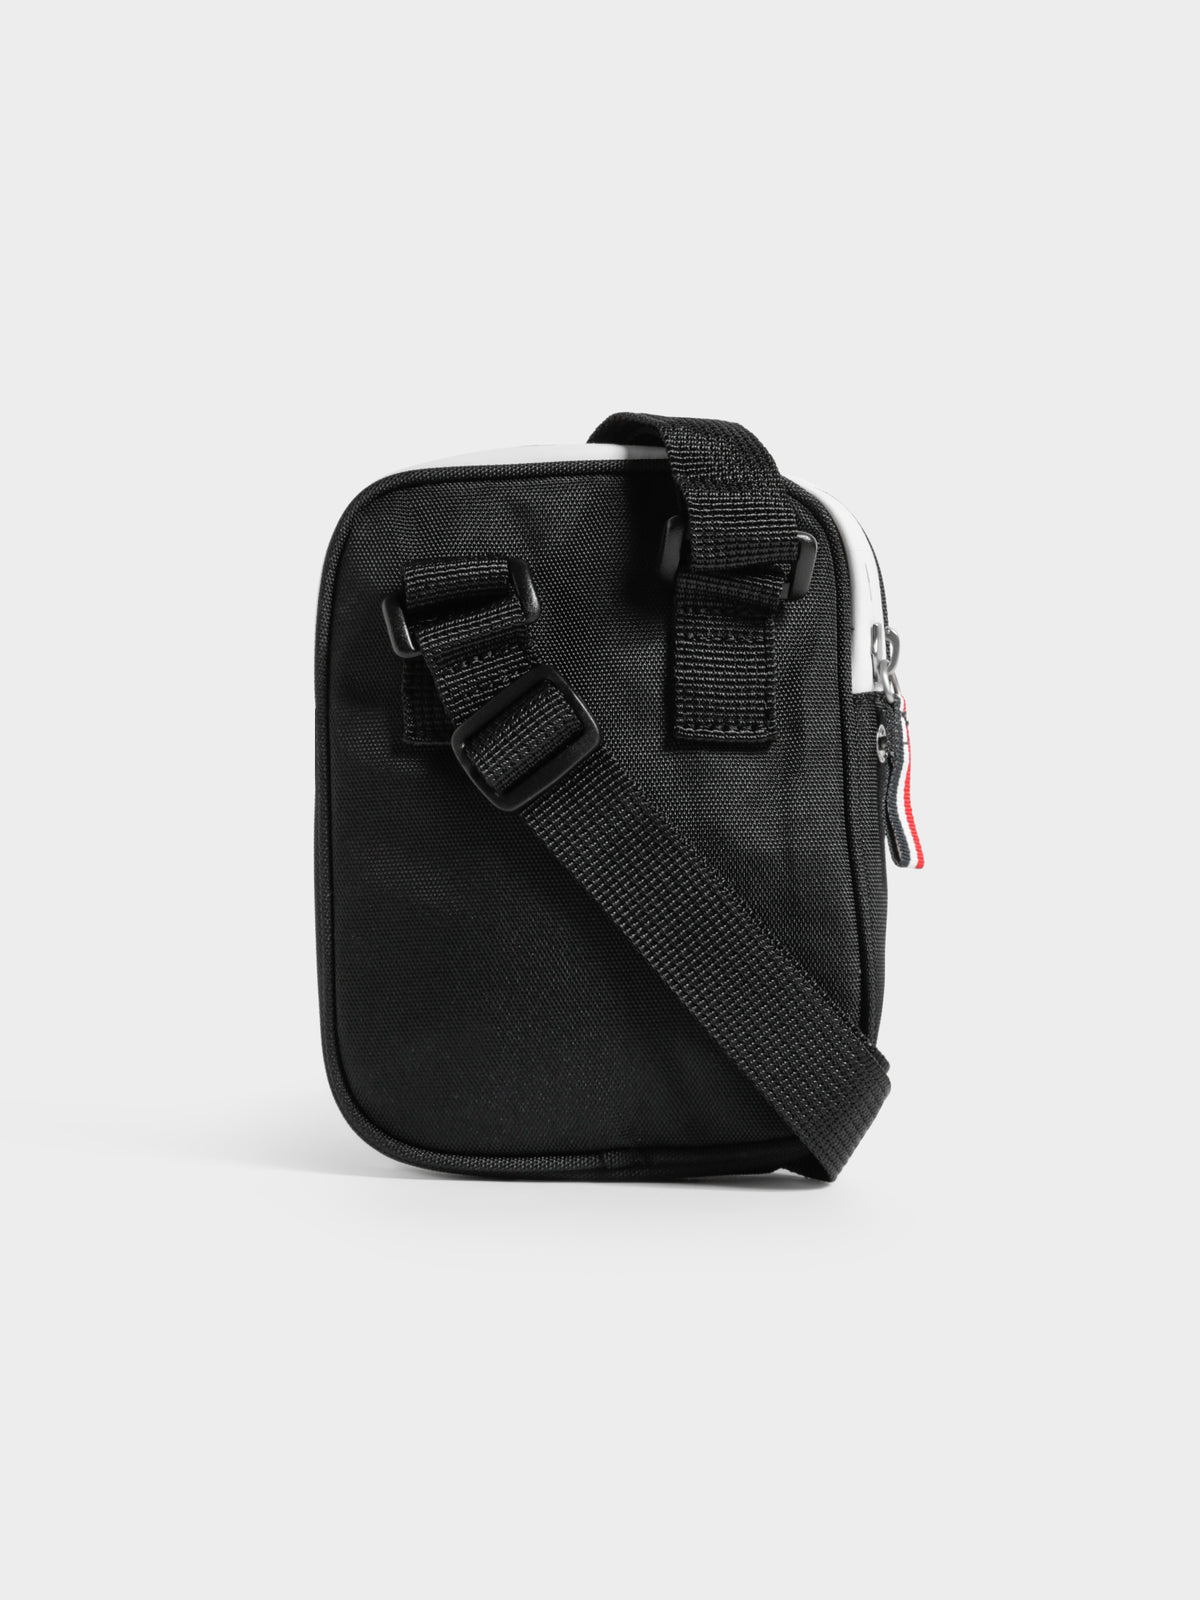 Cool City Compact X-Body Bag in Black